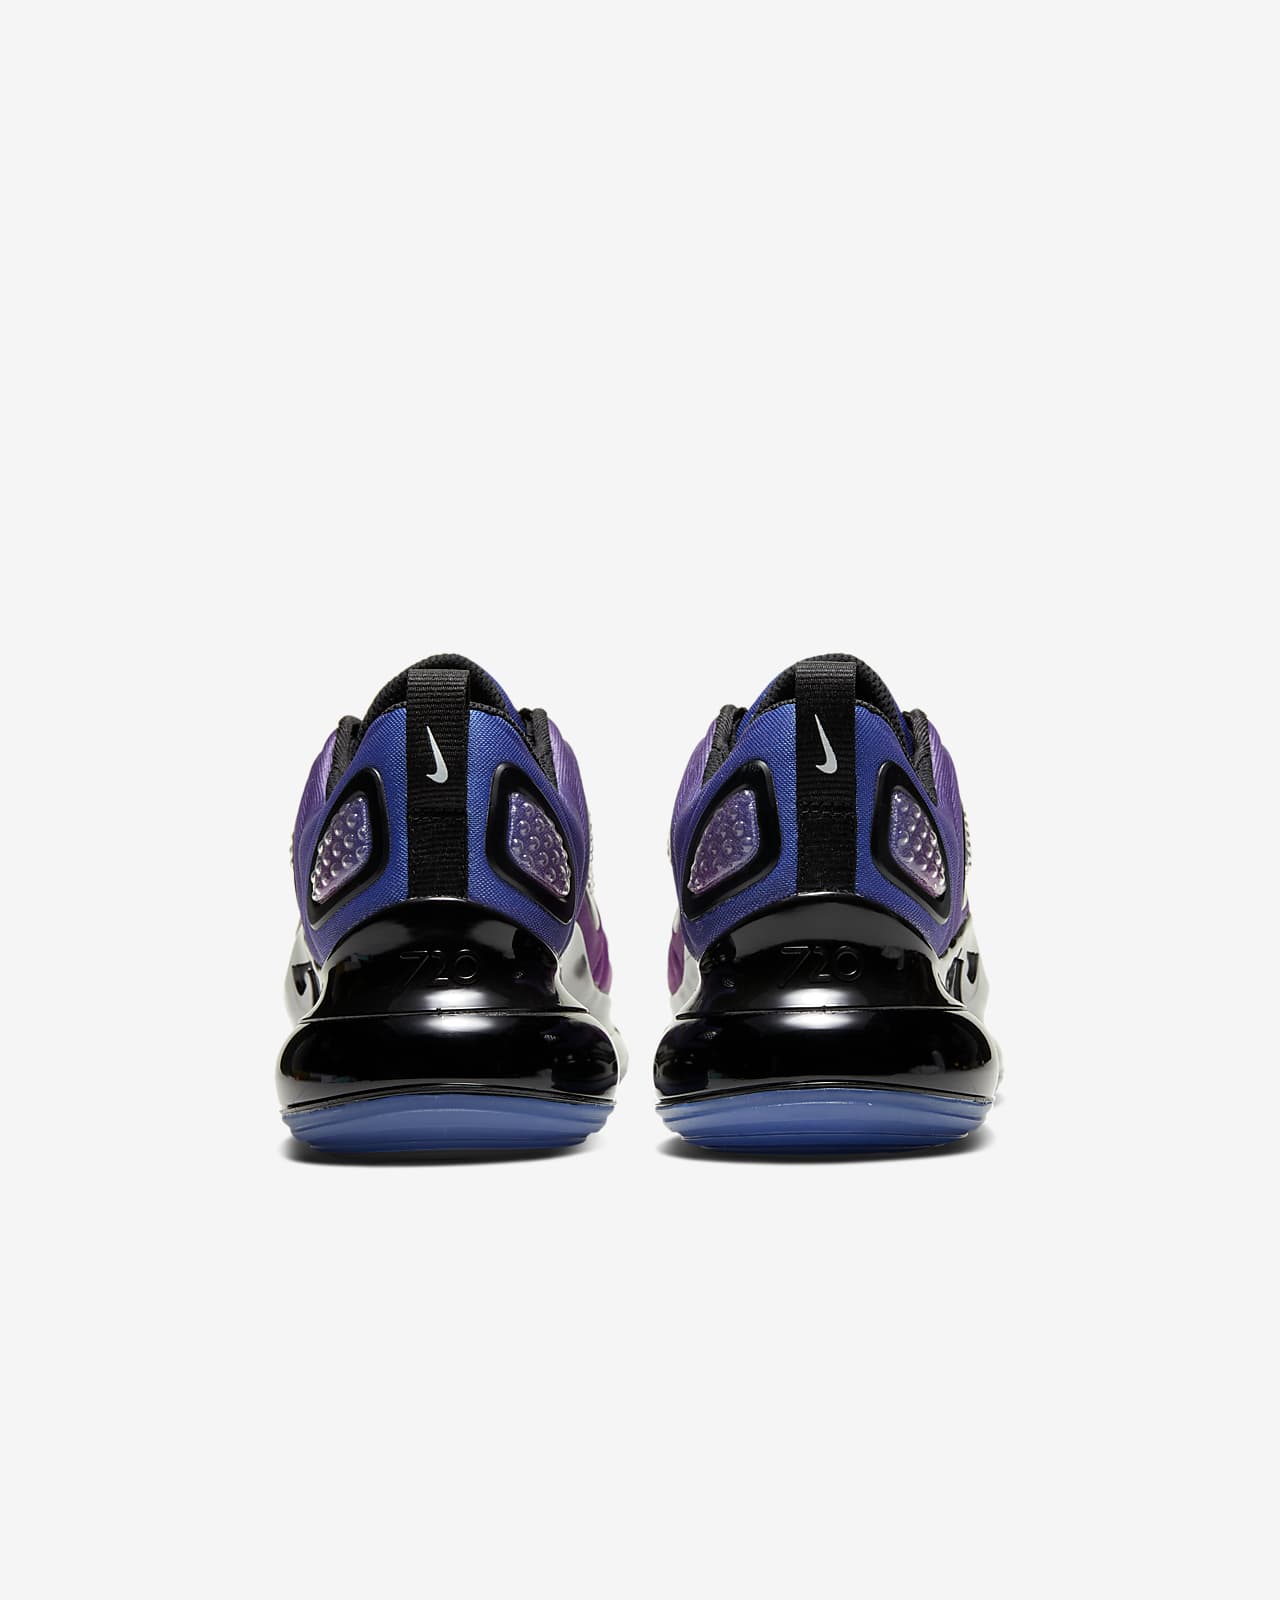 nike air max 720 price in philippines